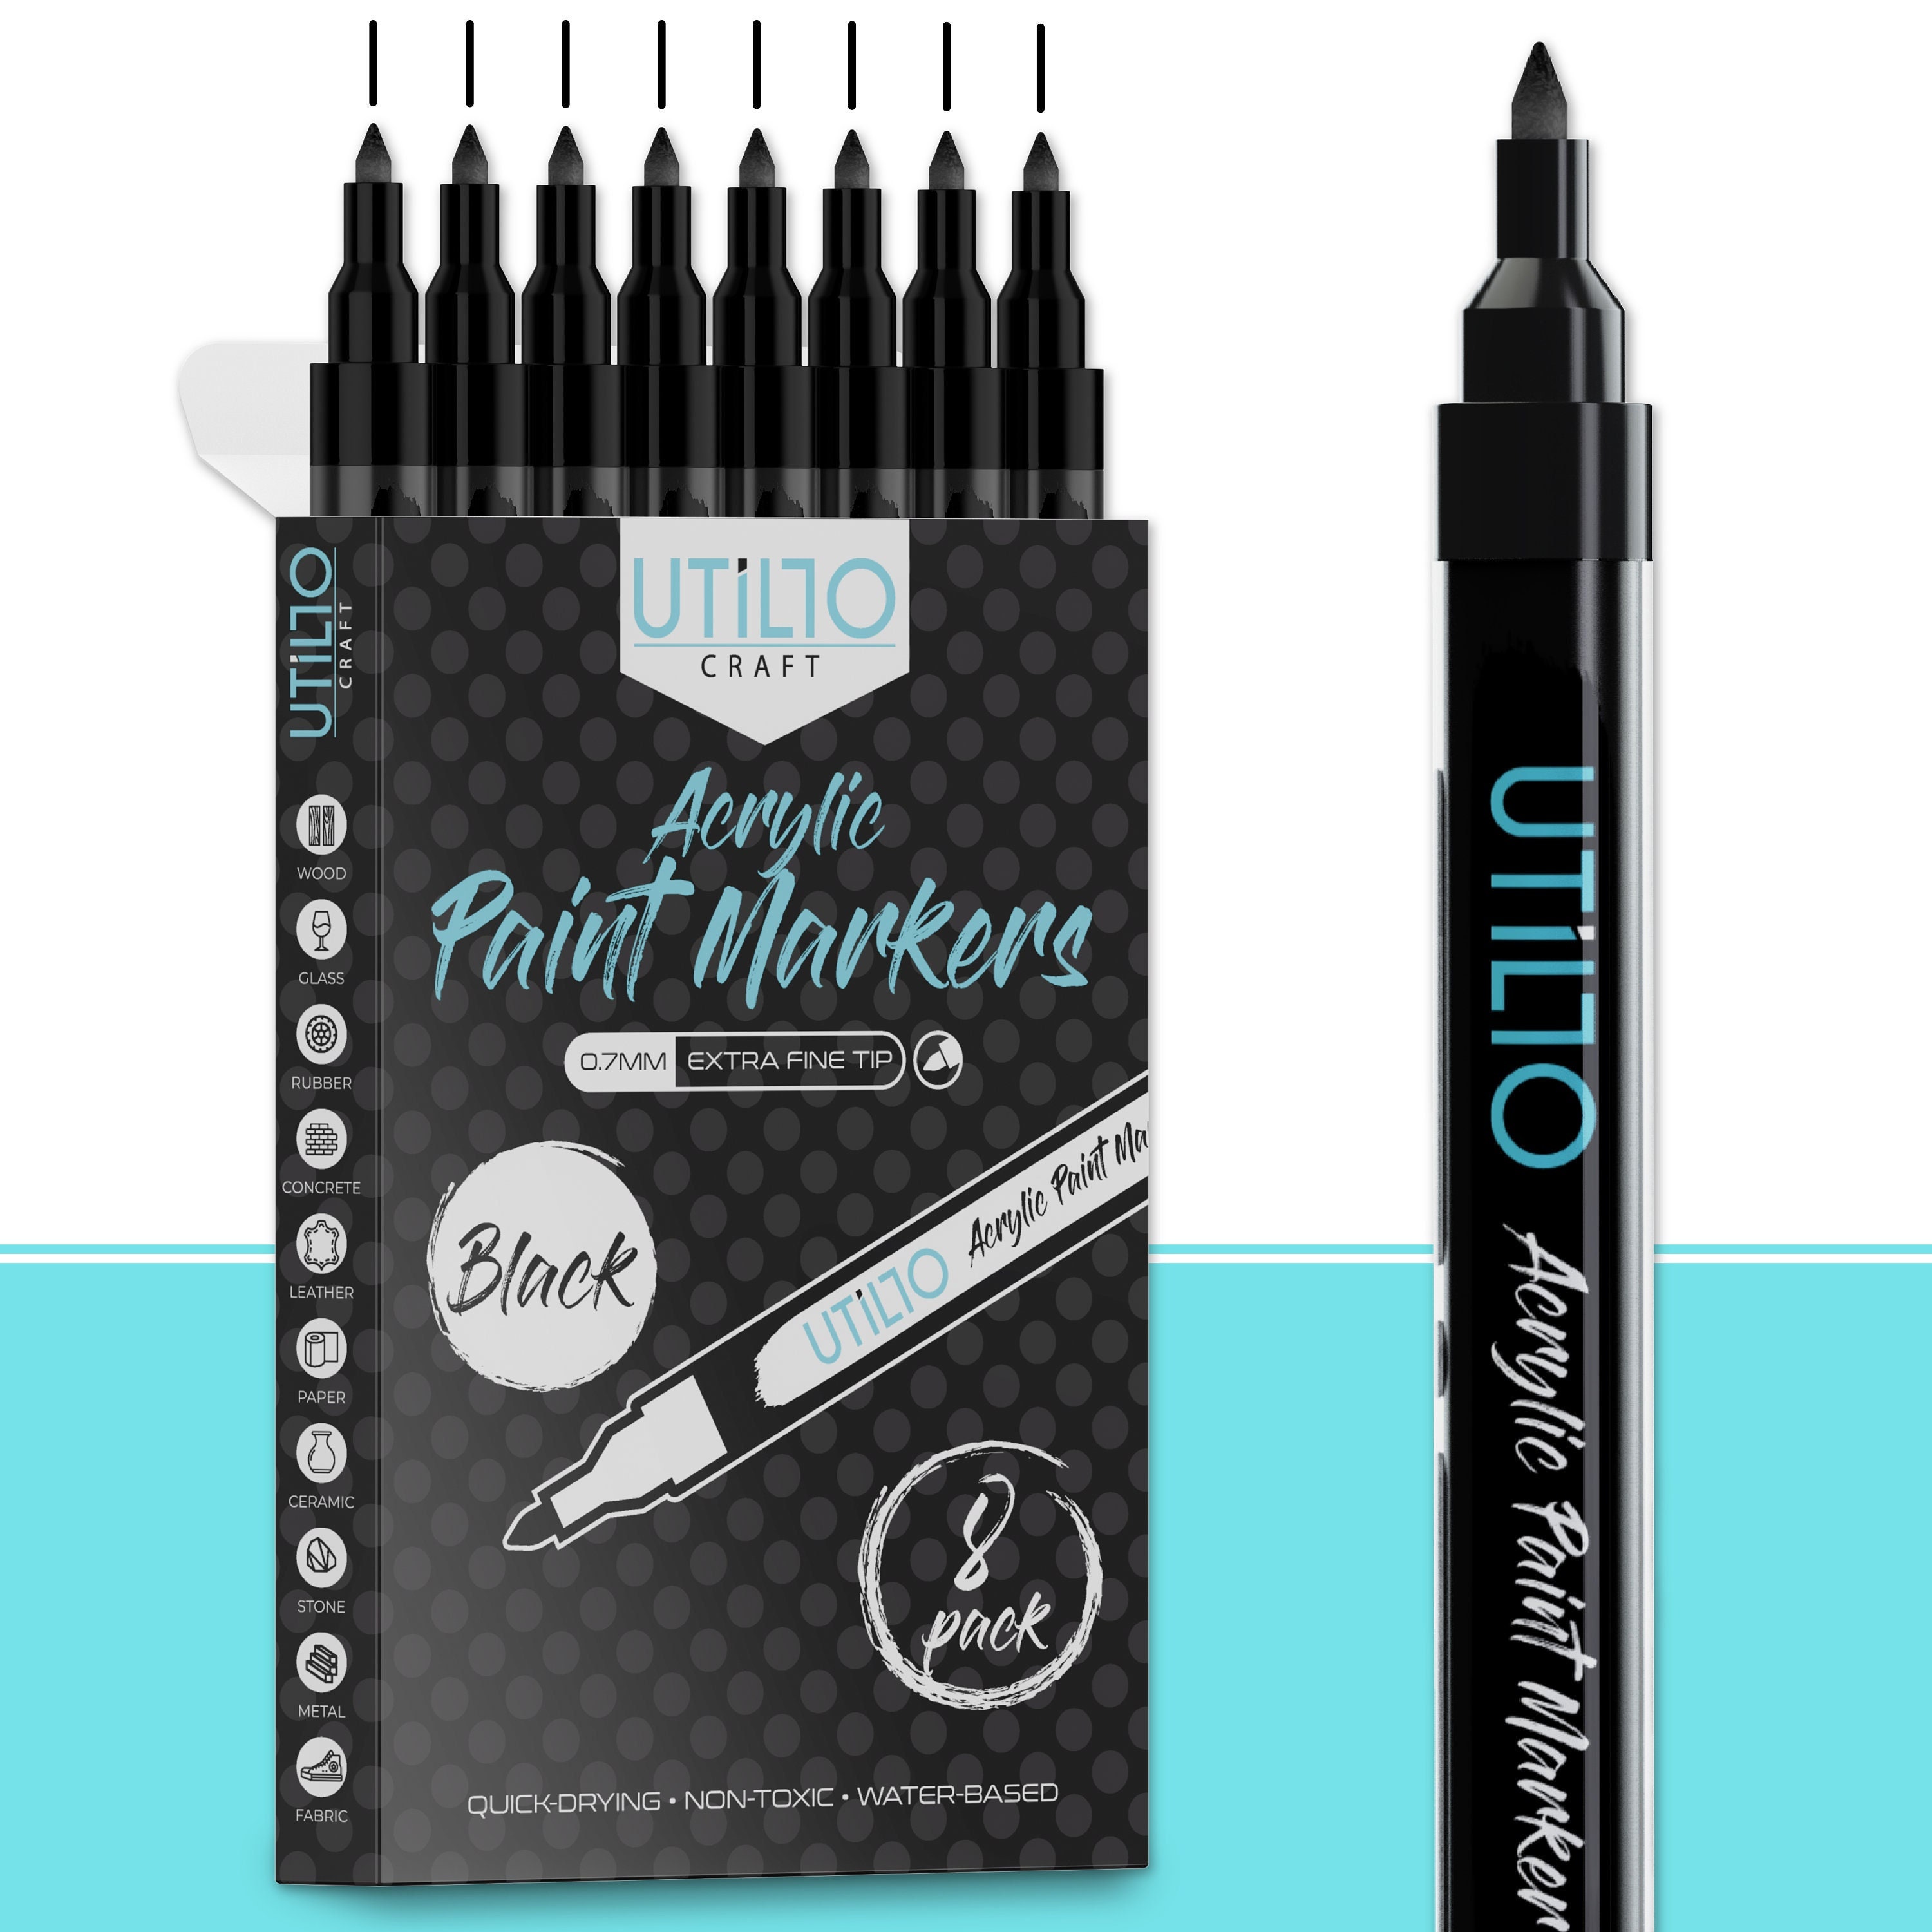 PINTAR Black Acrylic Paint Markers - Black Paint Pen as Guestbook